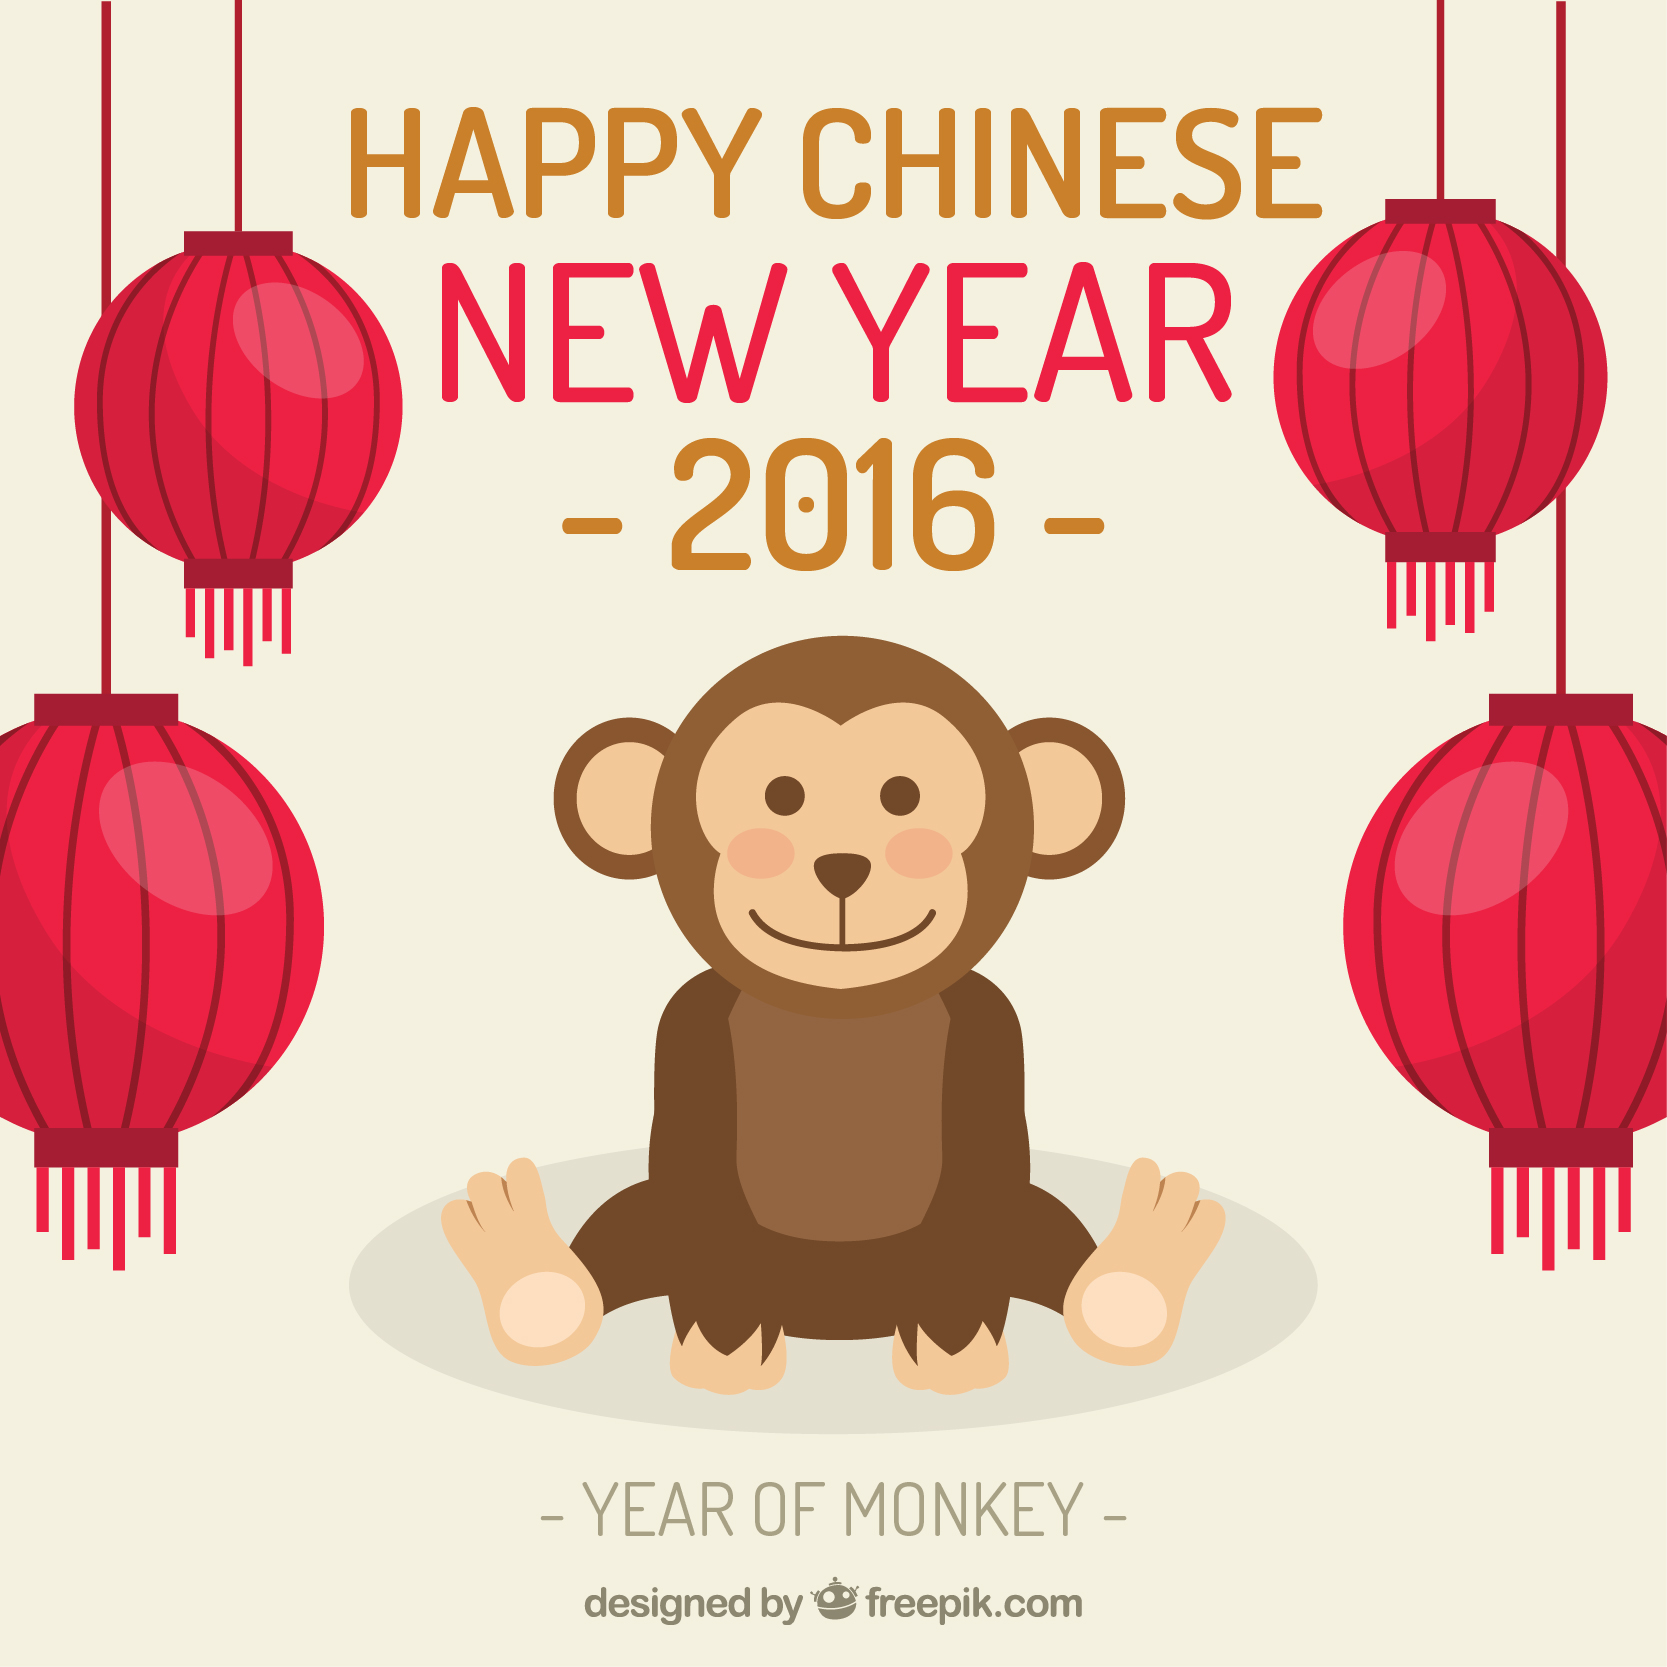 2016 – it's monkey time | 5pm Food & Dining Blog